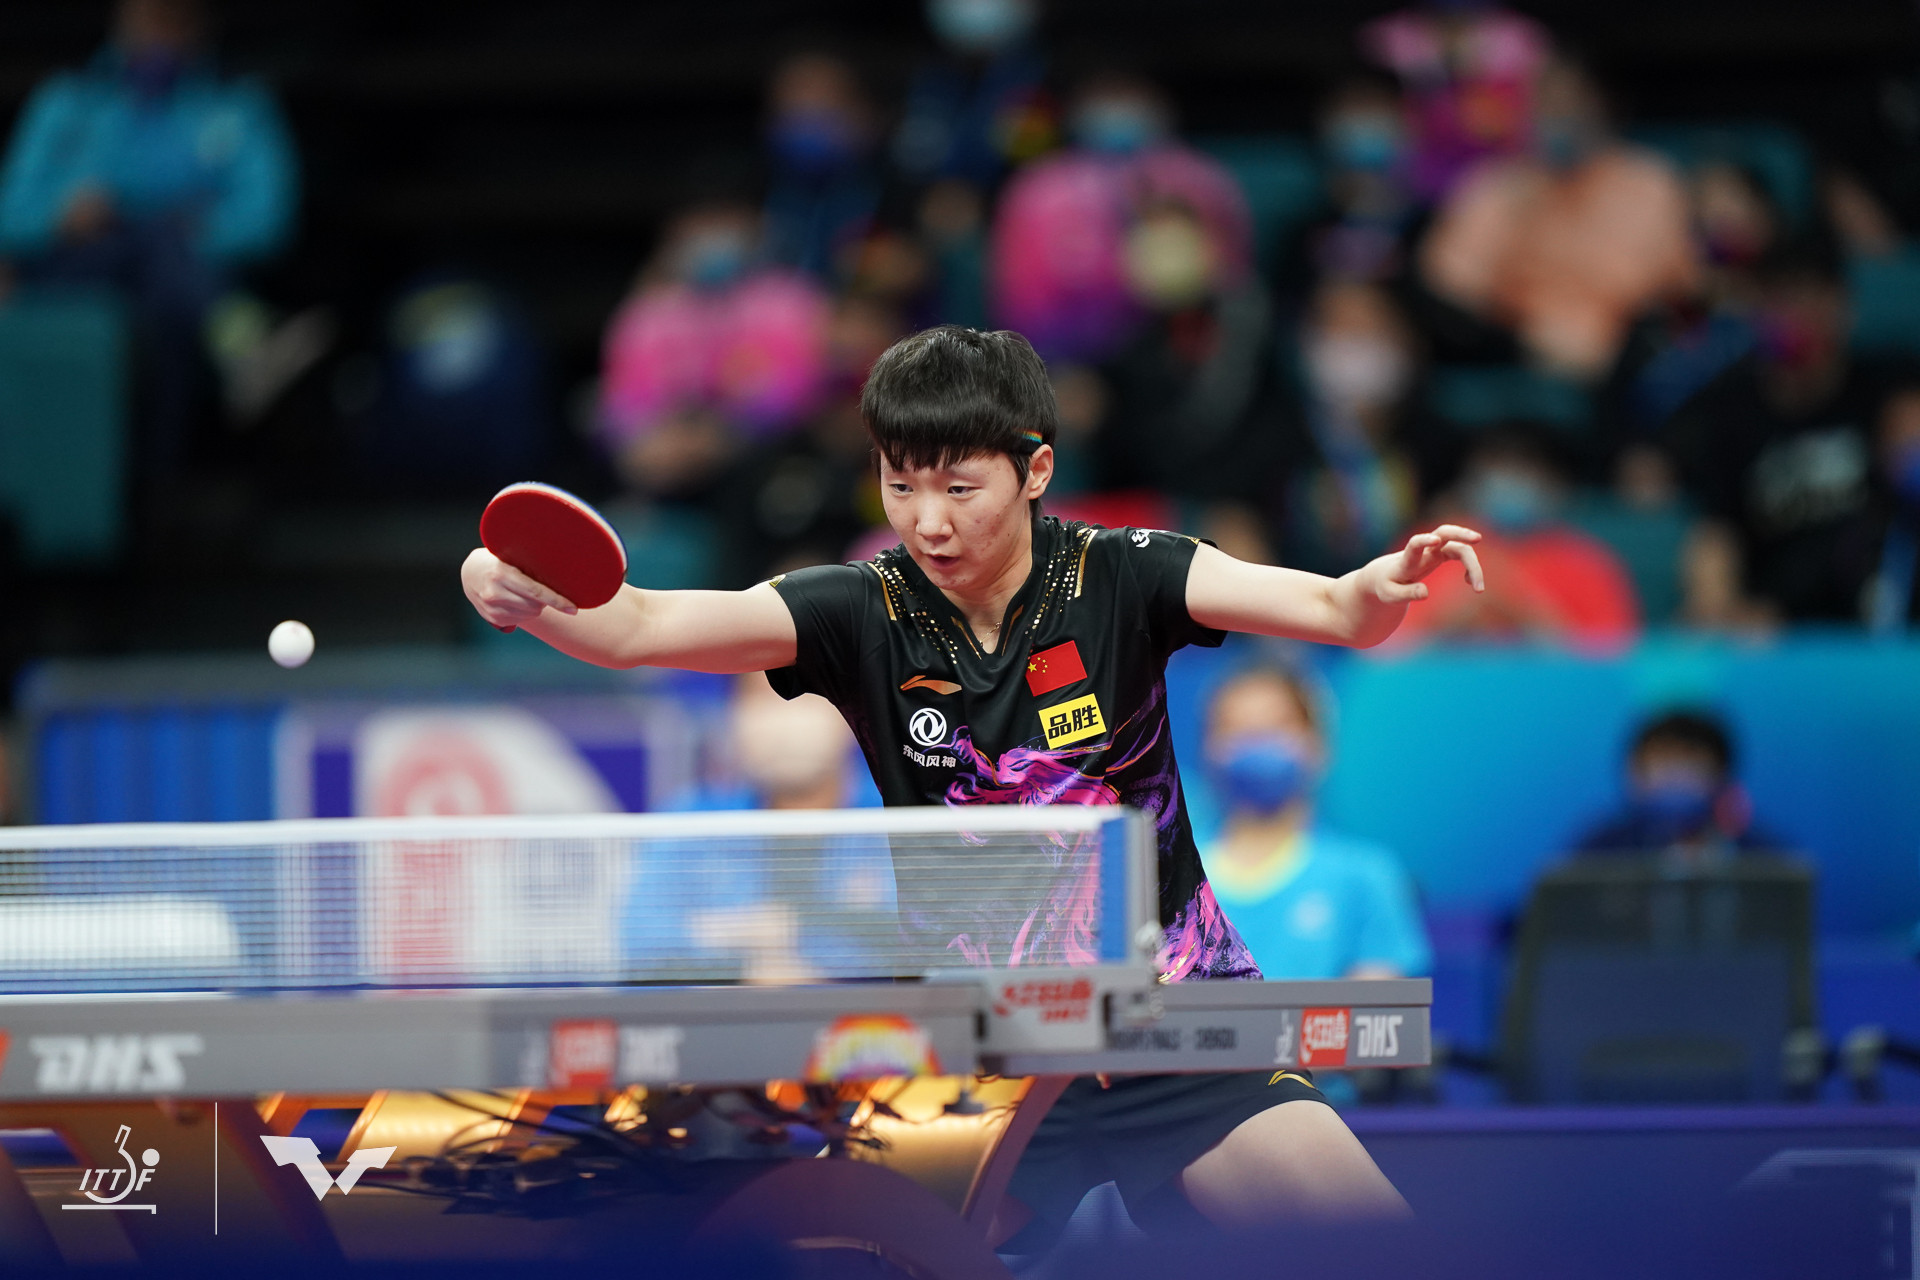 Both Chinese teams were unbeaten during the group stage phase of the competition ©World Table Tennis/Li Zhiyan